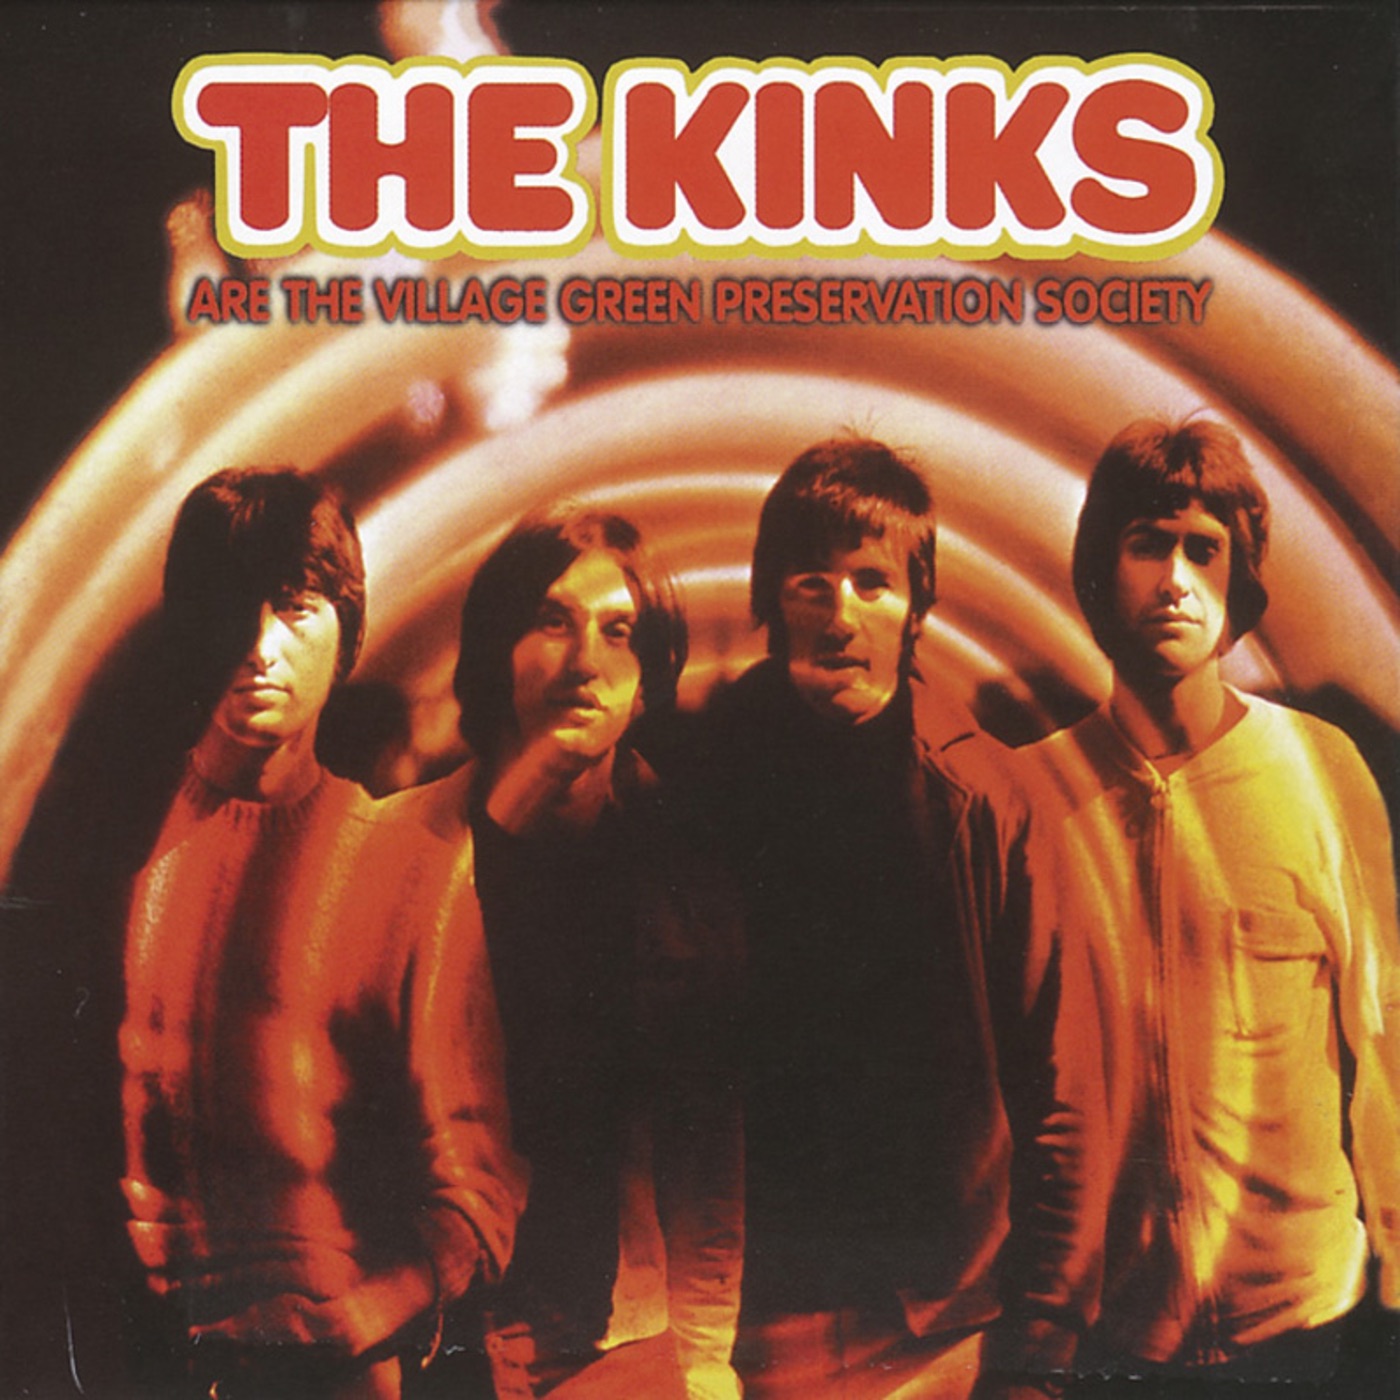 The Kinks Are the Village Green Preservation Society (2018 Stereo Remaster) by The Kinks